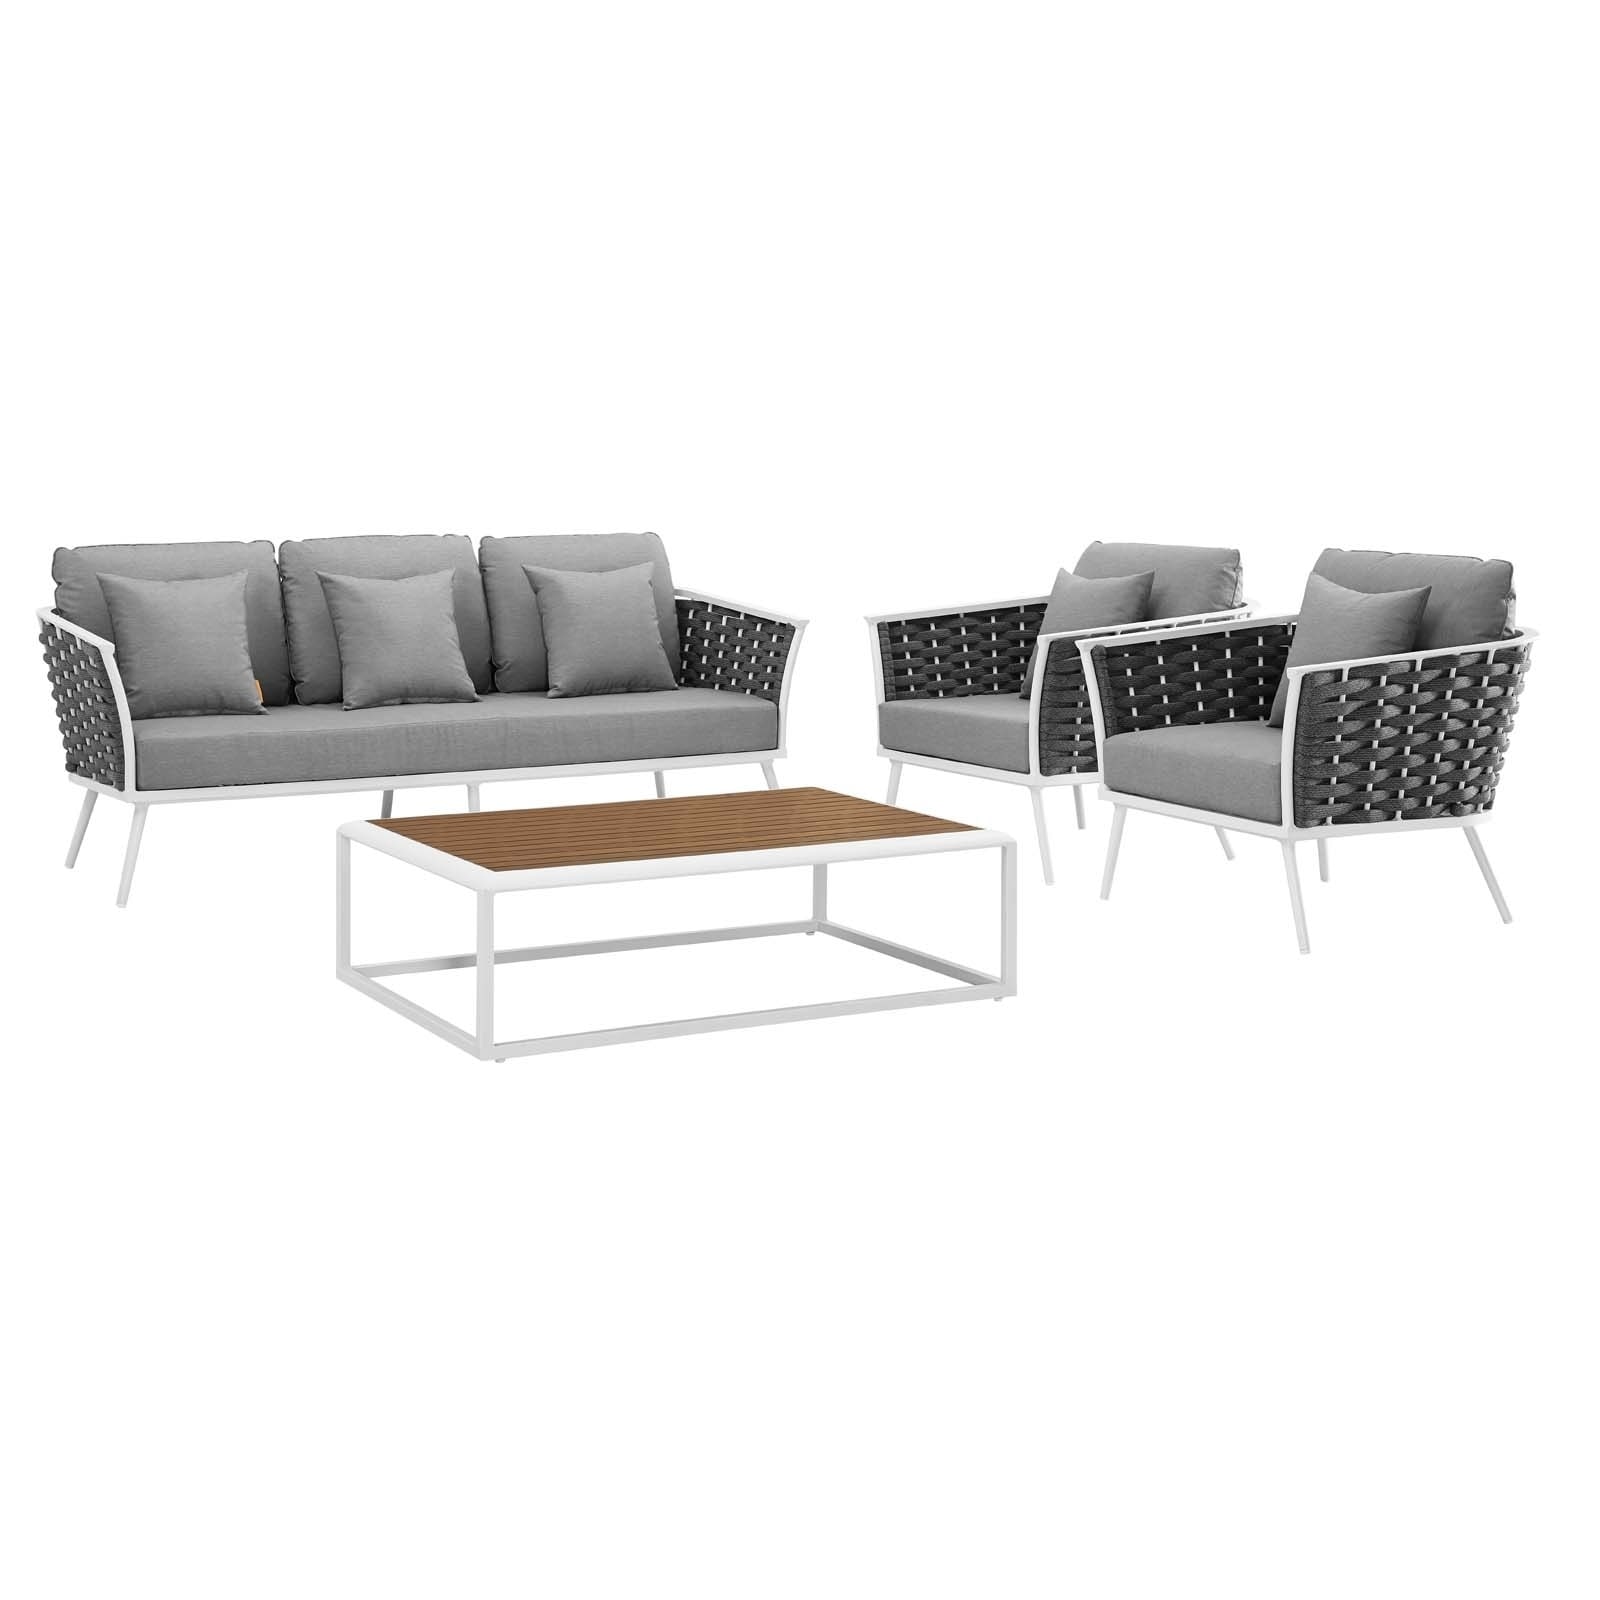 Stance 4 Piece Outdoor Patio Aluminum Sectional Sofa Set - N/a